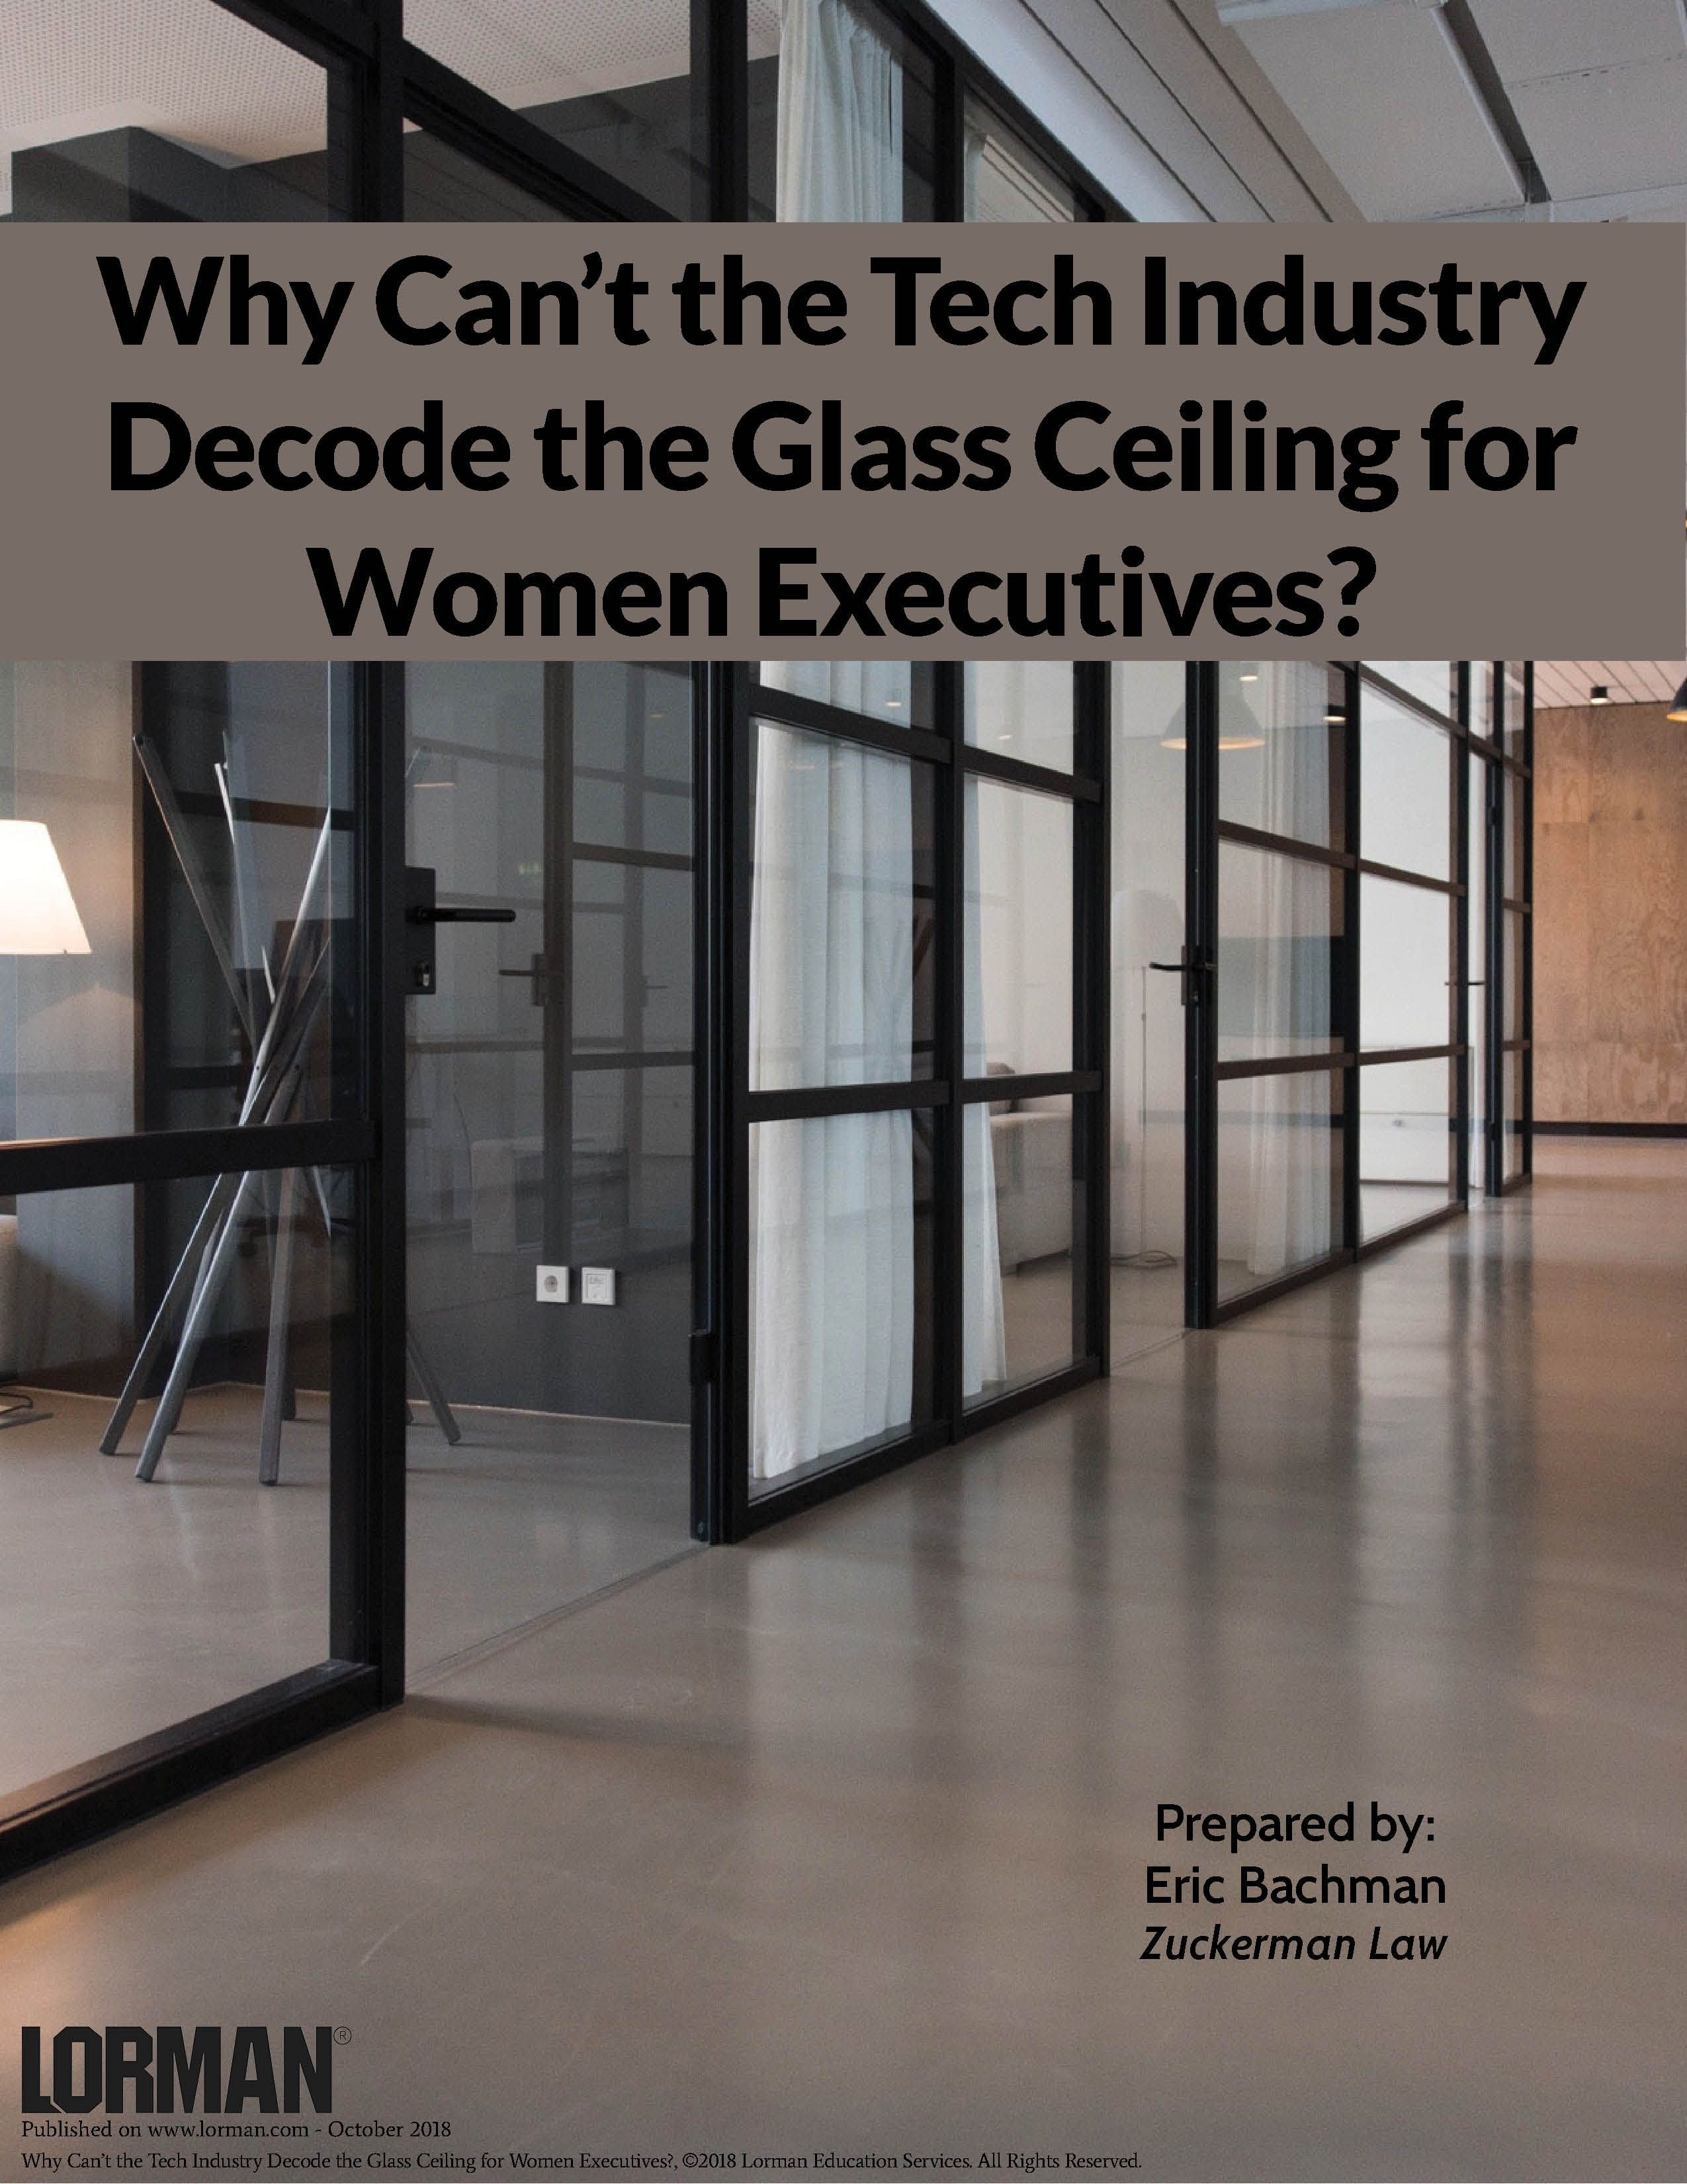 Why Can’t the Tech Industry Decode the Glass Ceiling for Women Executives?